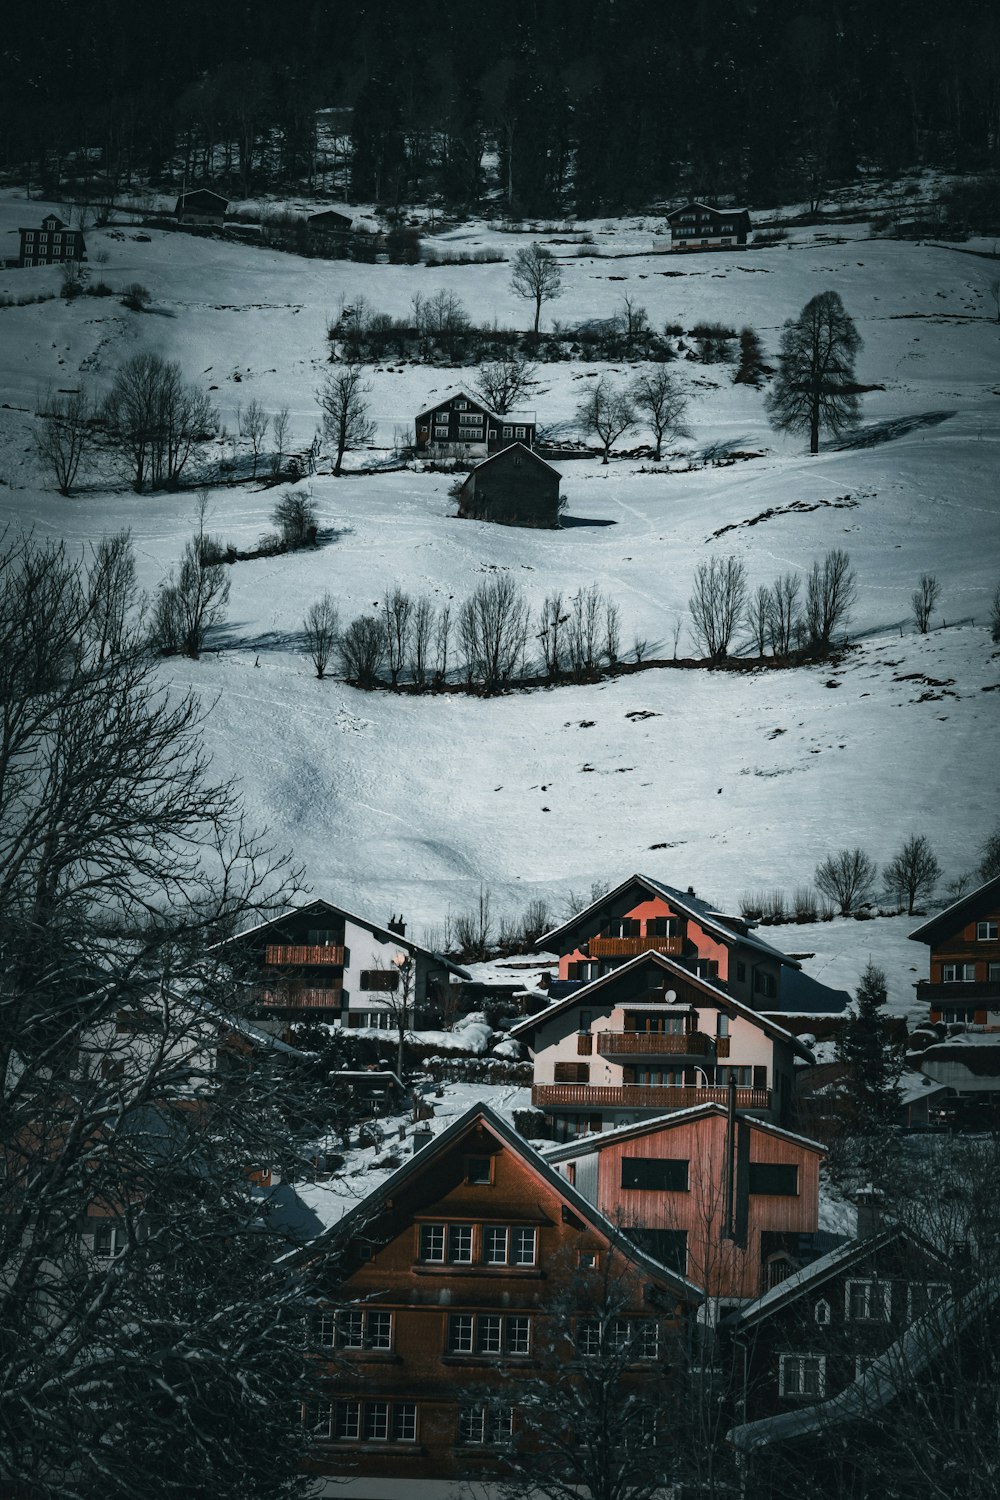 a snowy landscape with houses and trees in the foreground